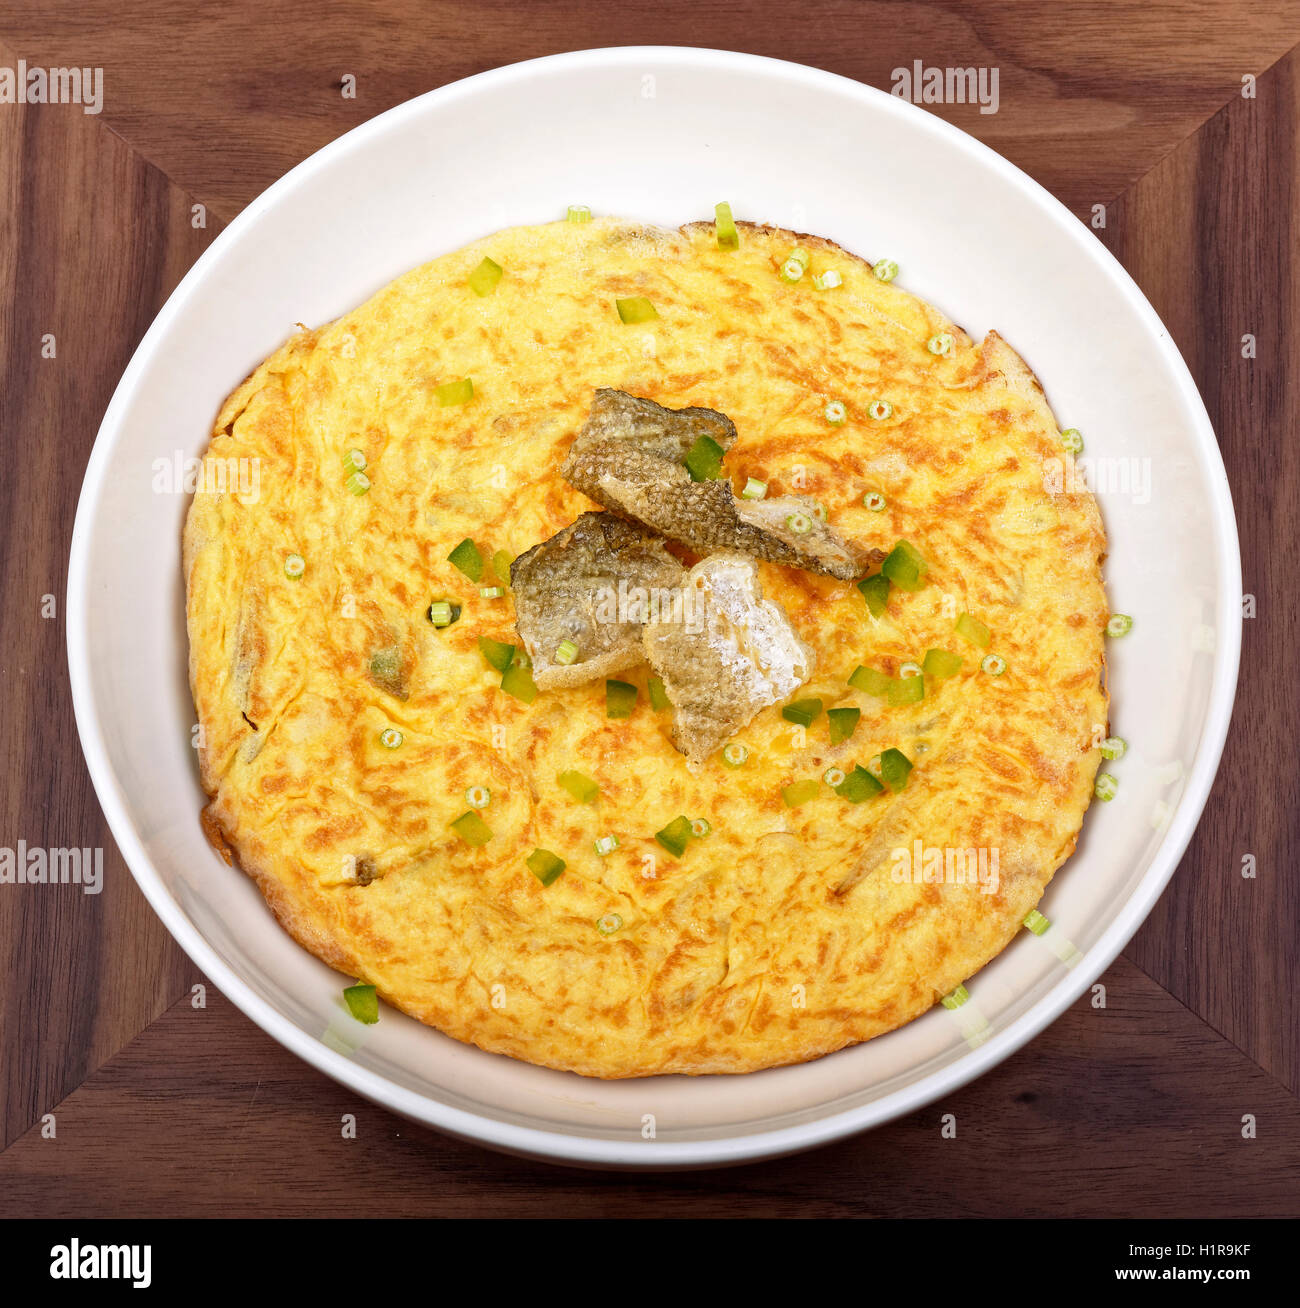 Potato's omelette with cod. Stock Photo